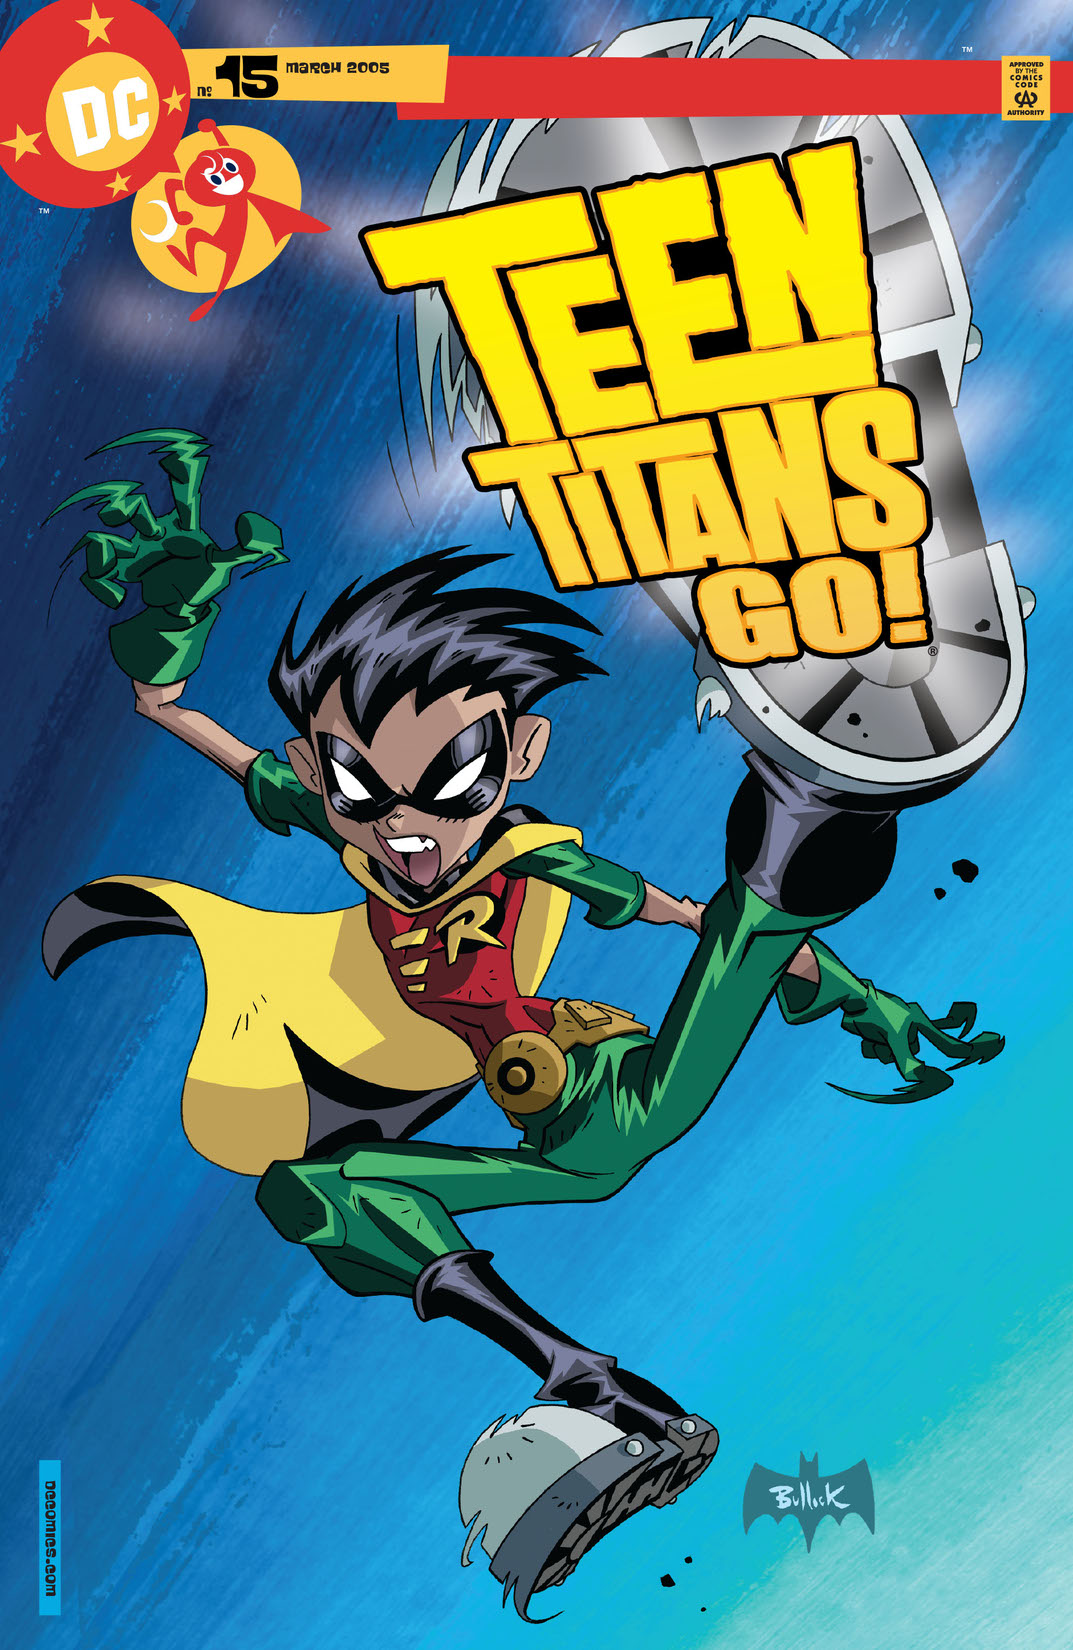 Teen Titans Go! (2003-) #15 preview images